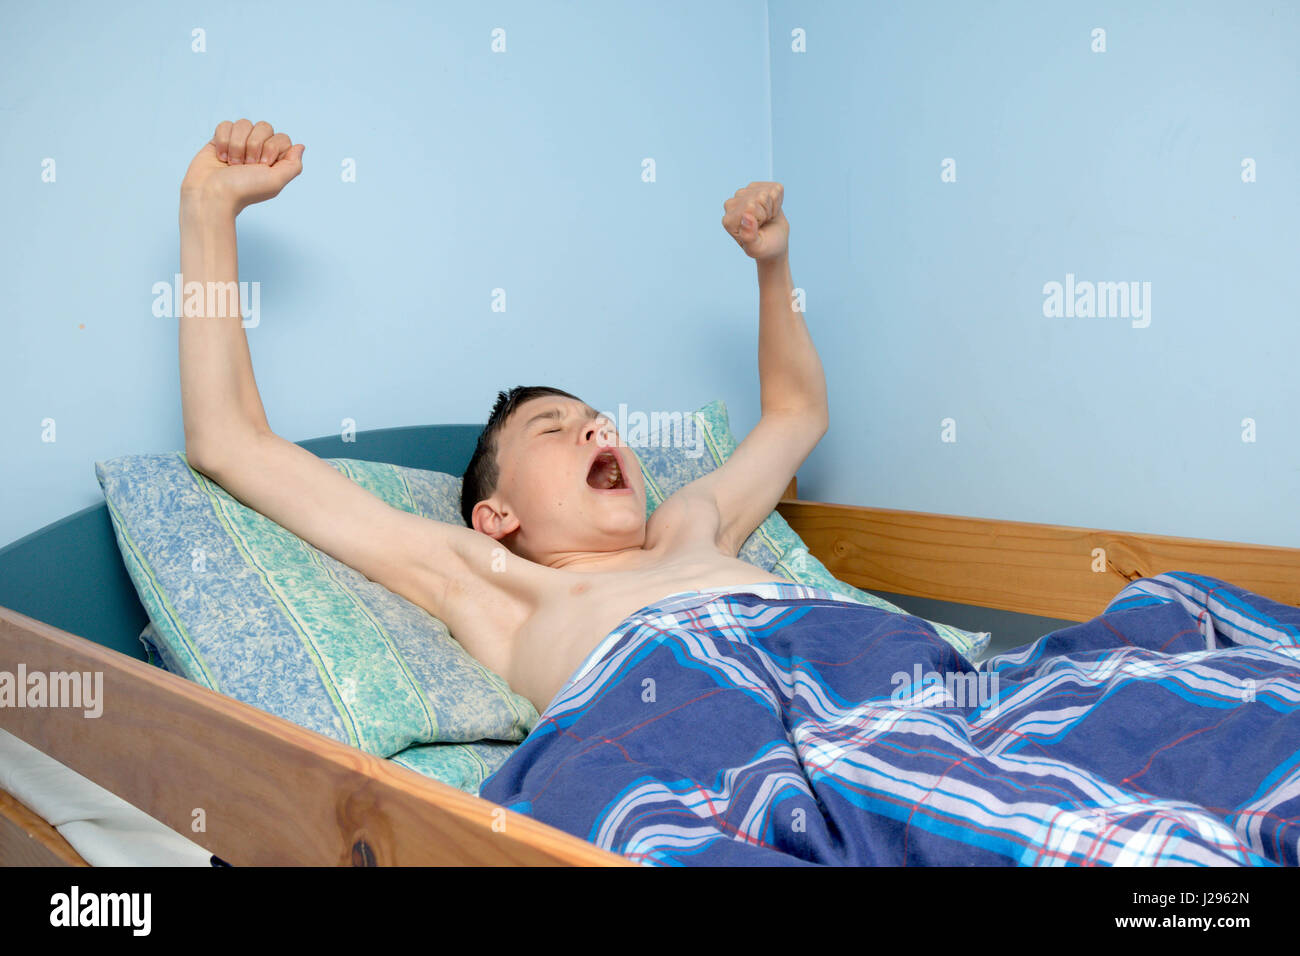 Young caucasian teenage boy waking up in bed Stock Photo